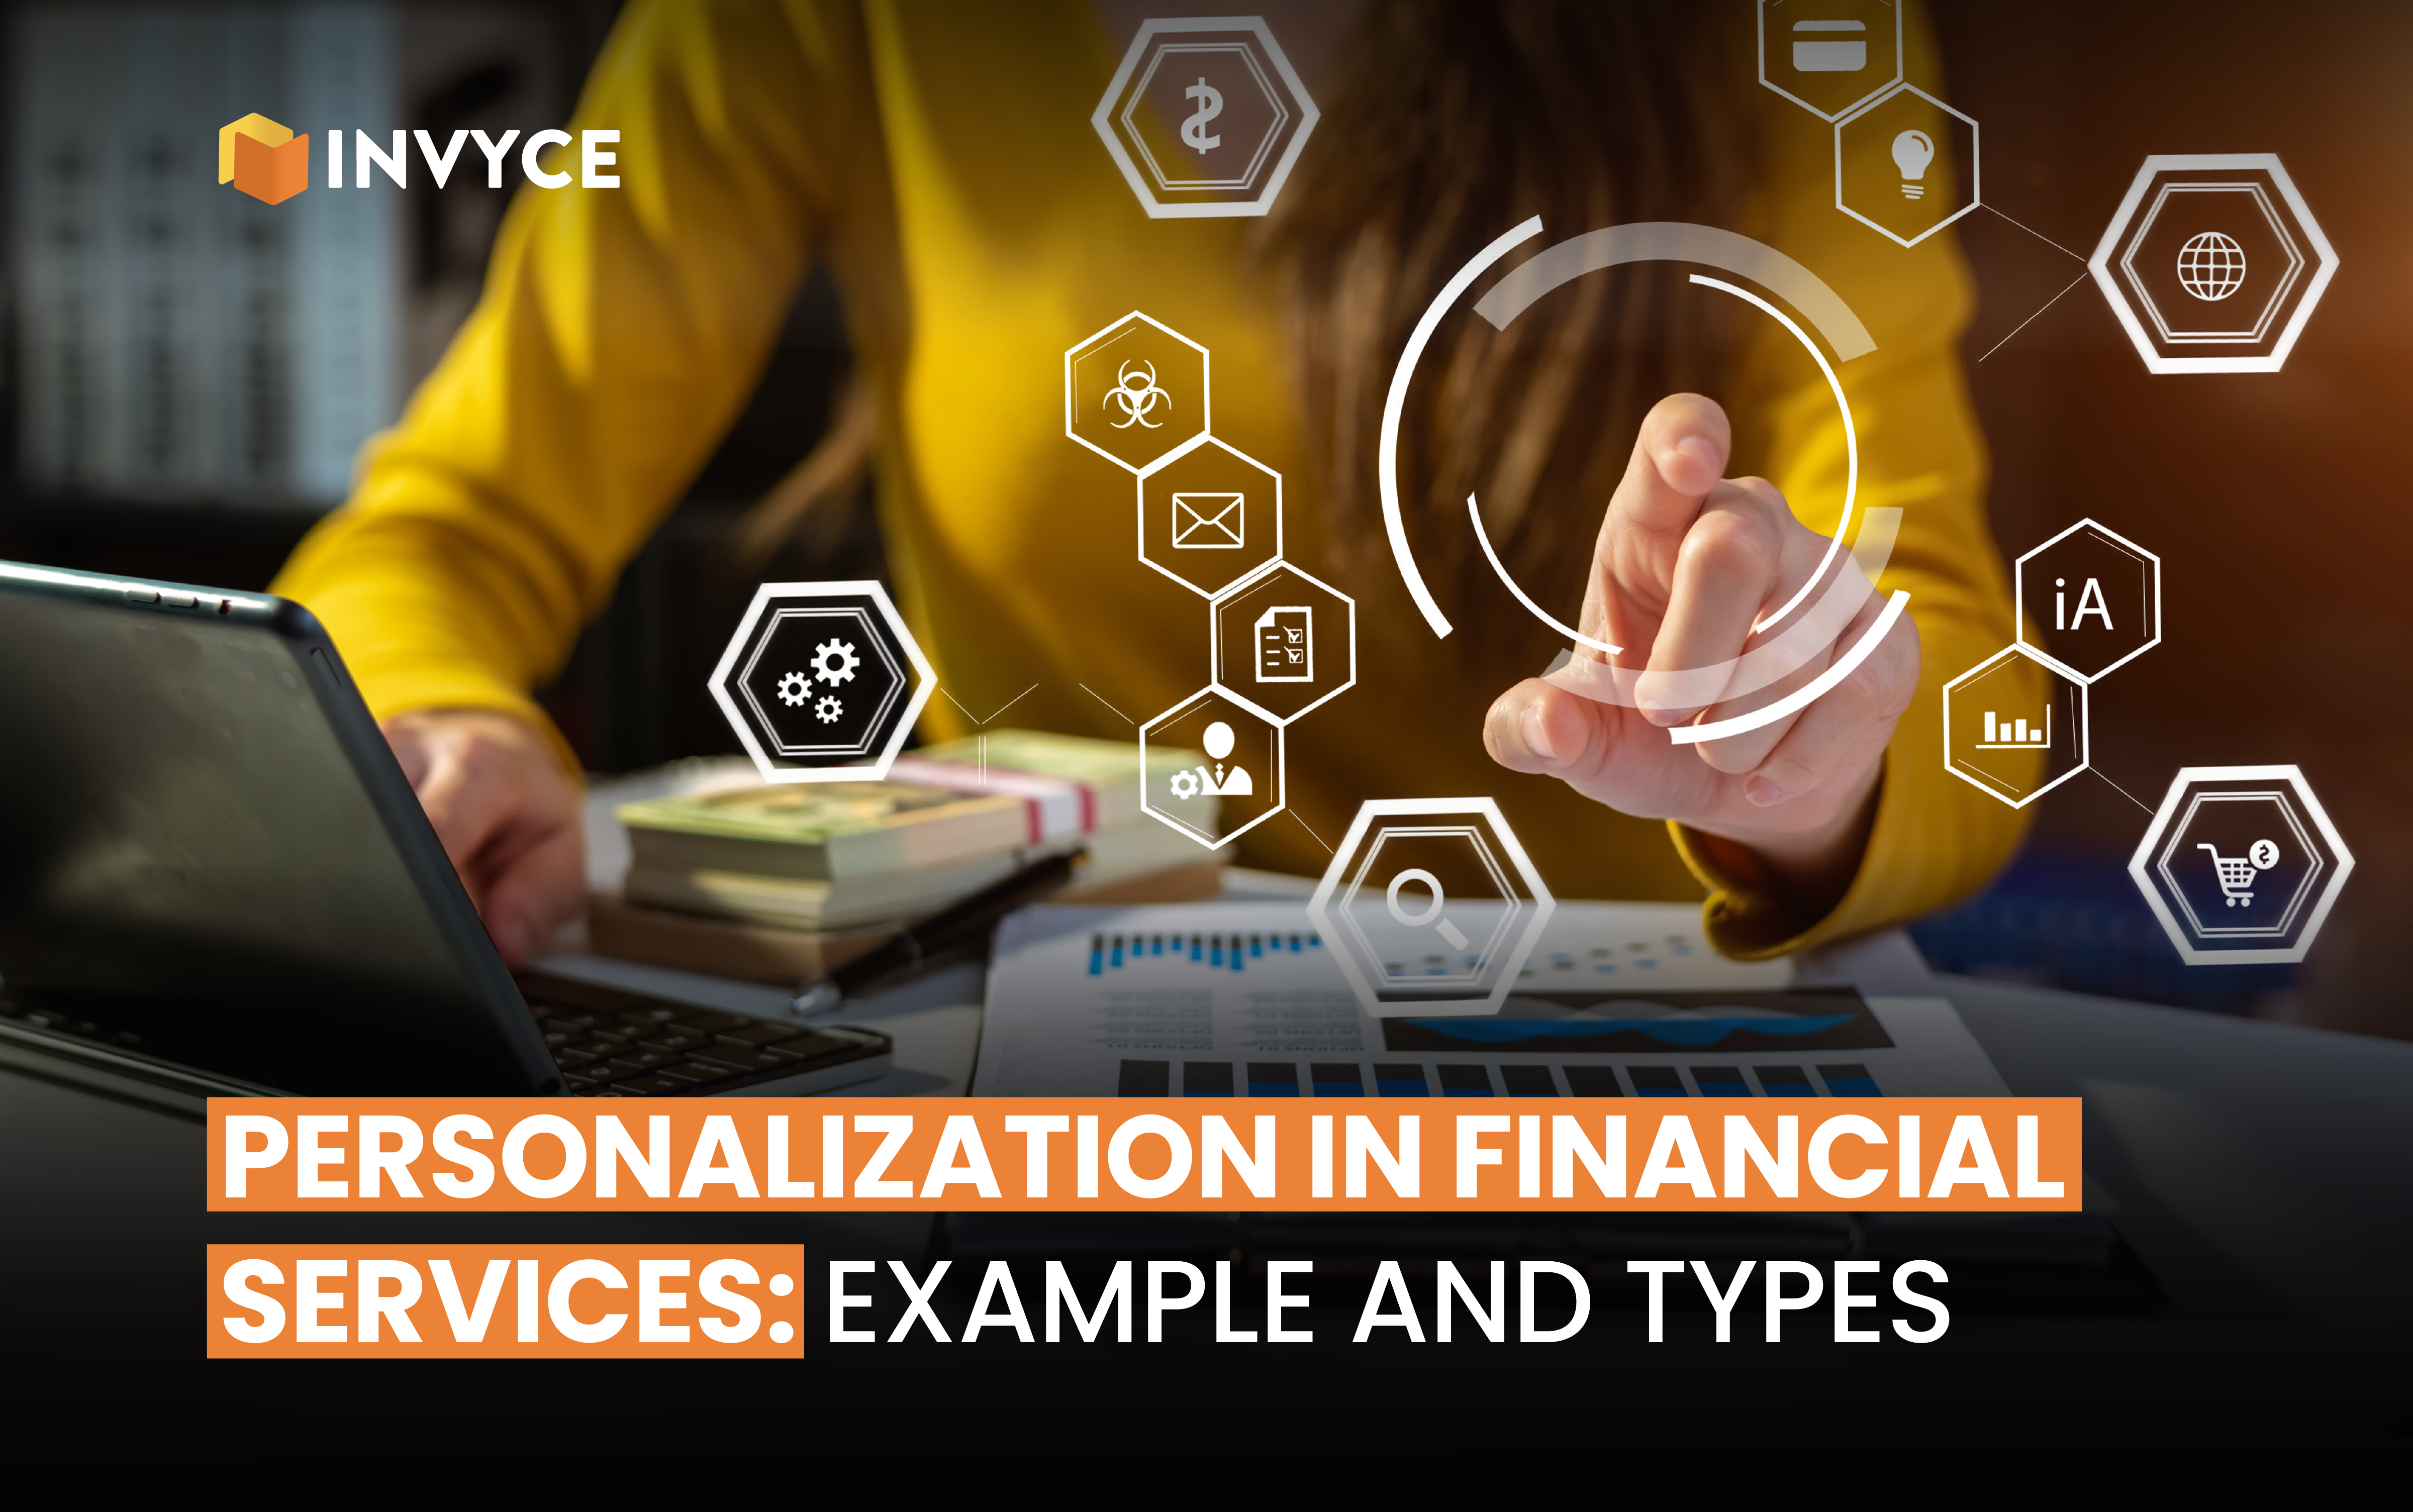 Personalization in Financial Services: Example and Types